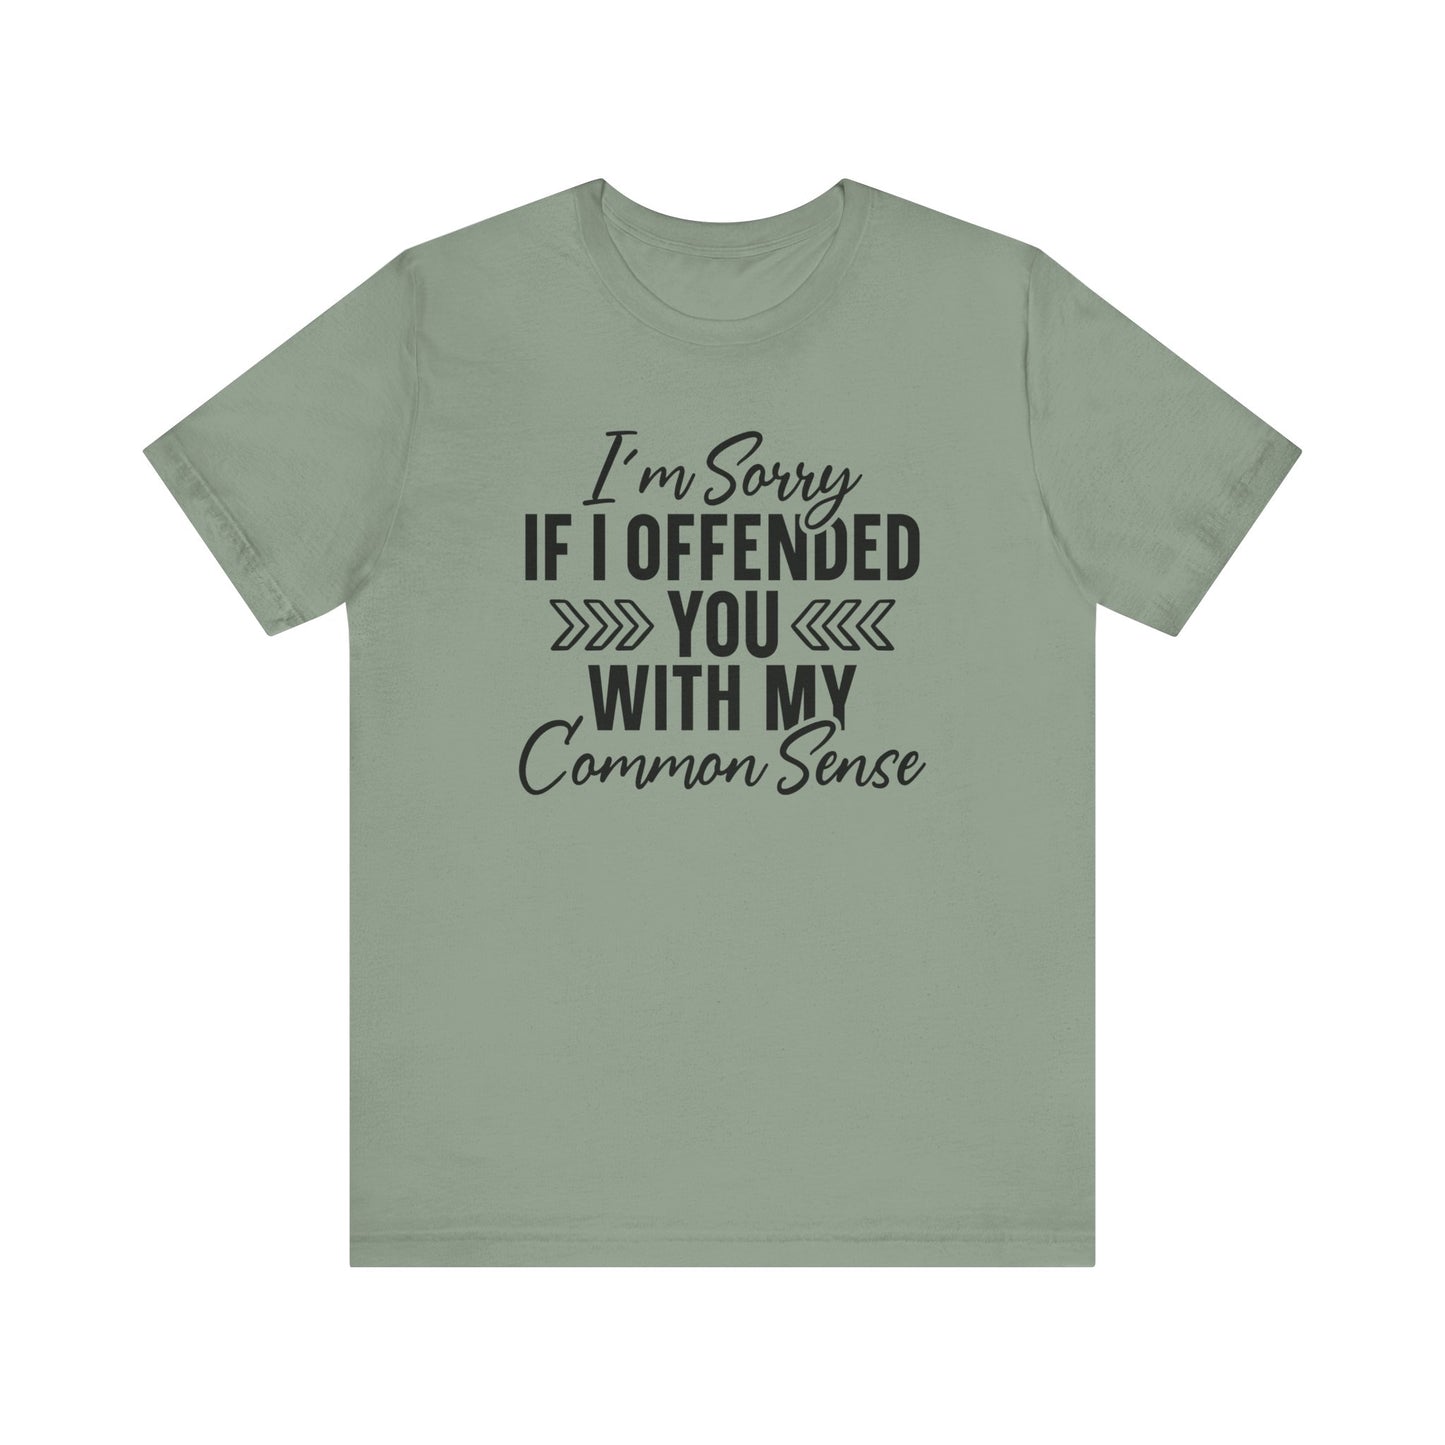 Offended T-Shirt For Sarcastic Sorry T Shirt For Common Sense TShirt